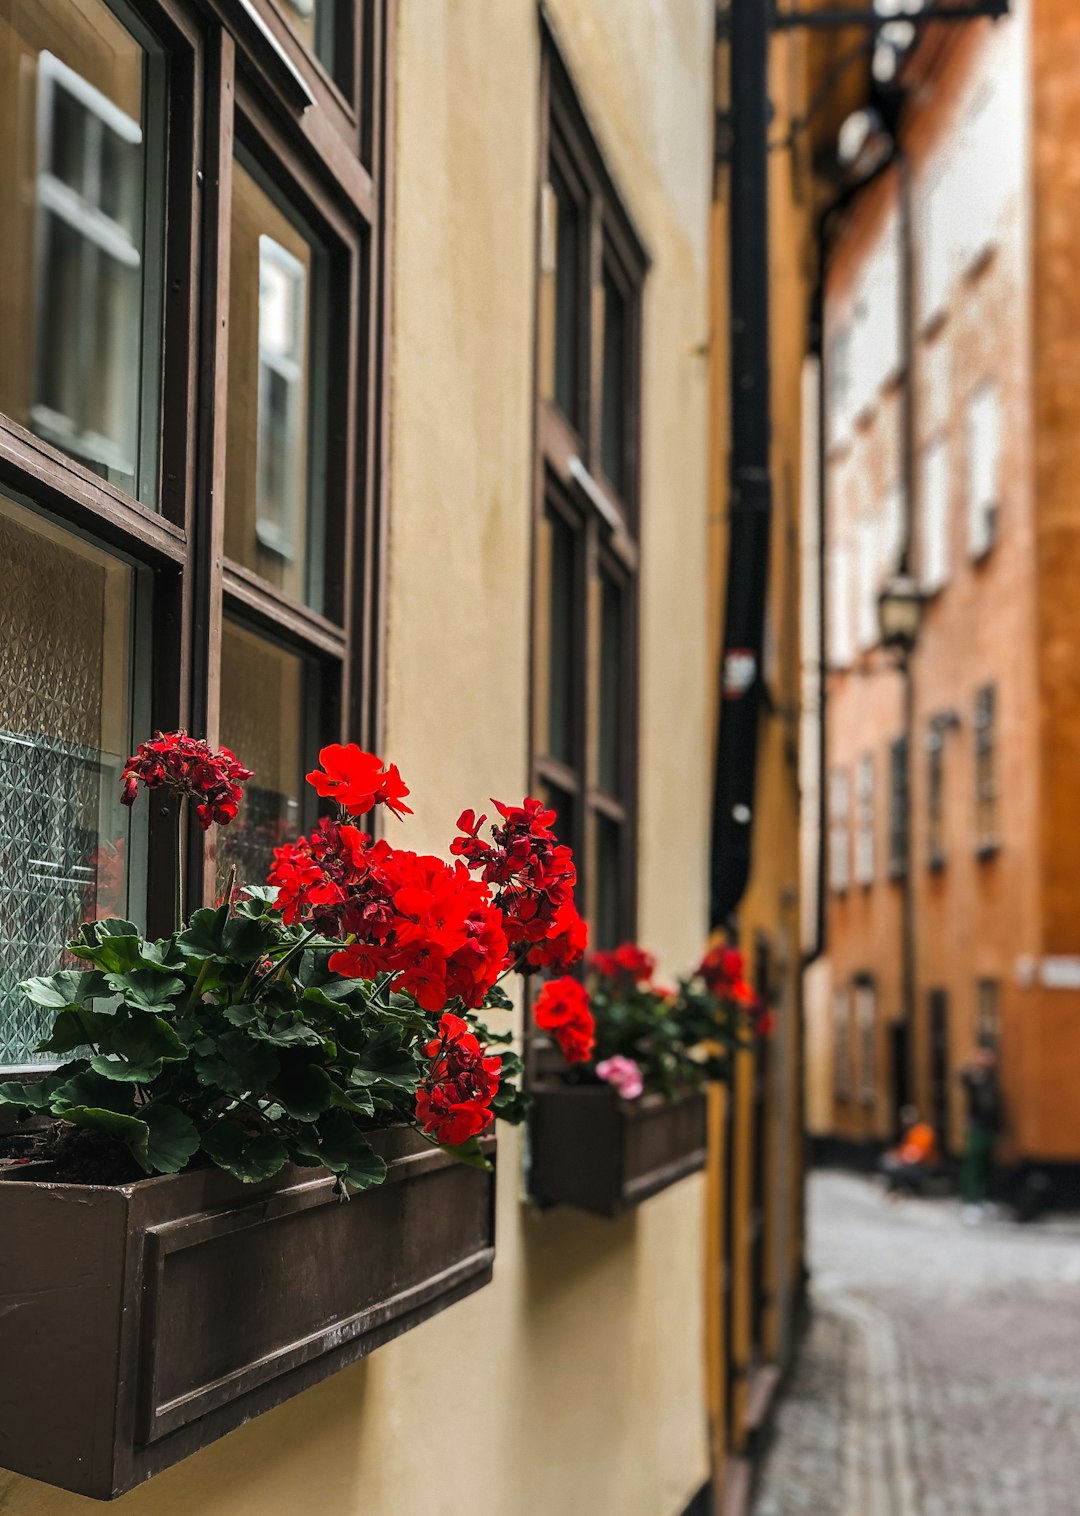 Travel Tips and Stories of Baggensgatan in Sweden